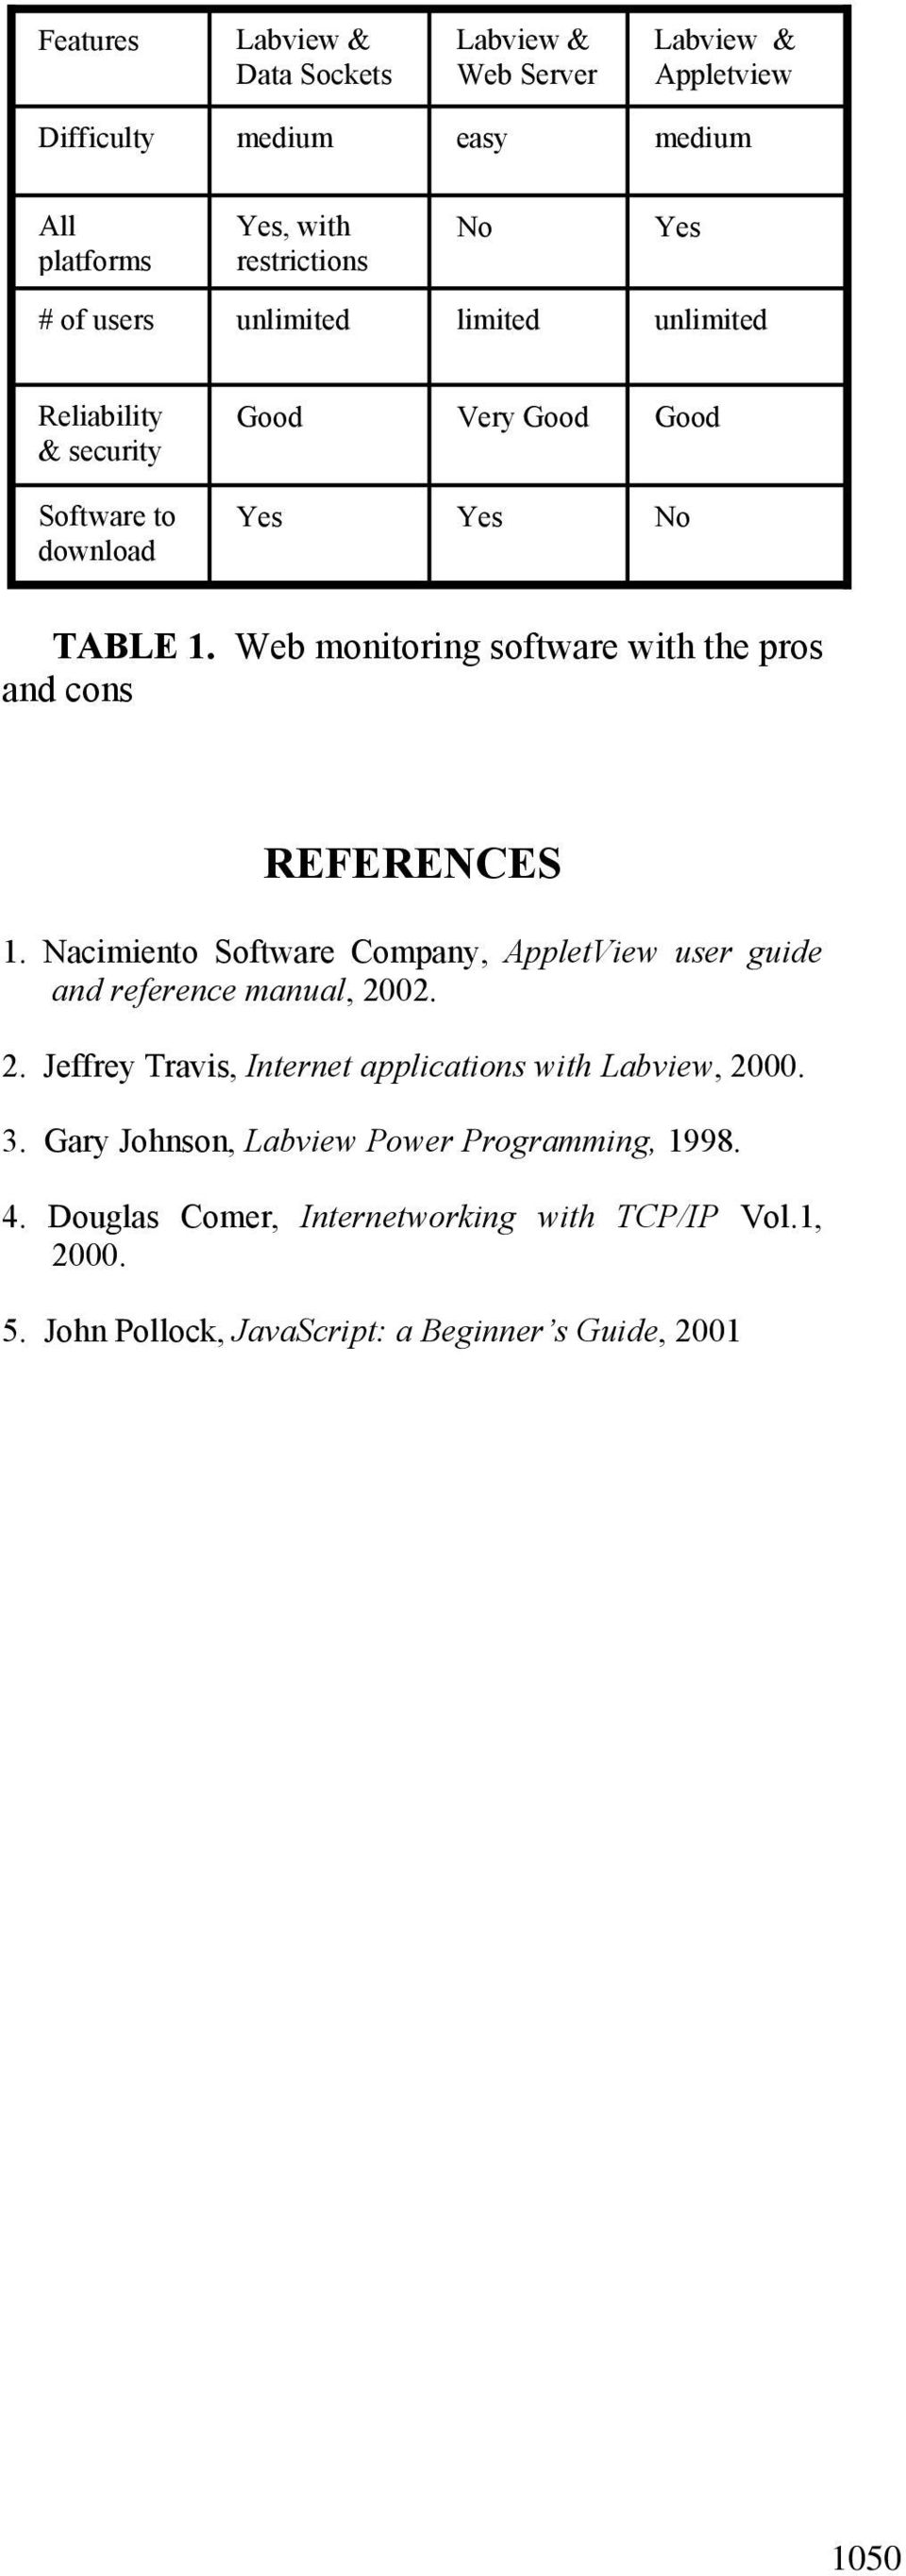 Nacimiento Software Company, AppletView user guide and reference manual, 2002. 2. Jeffrey Travis, Internet applications with Labview, 2000. 3.